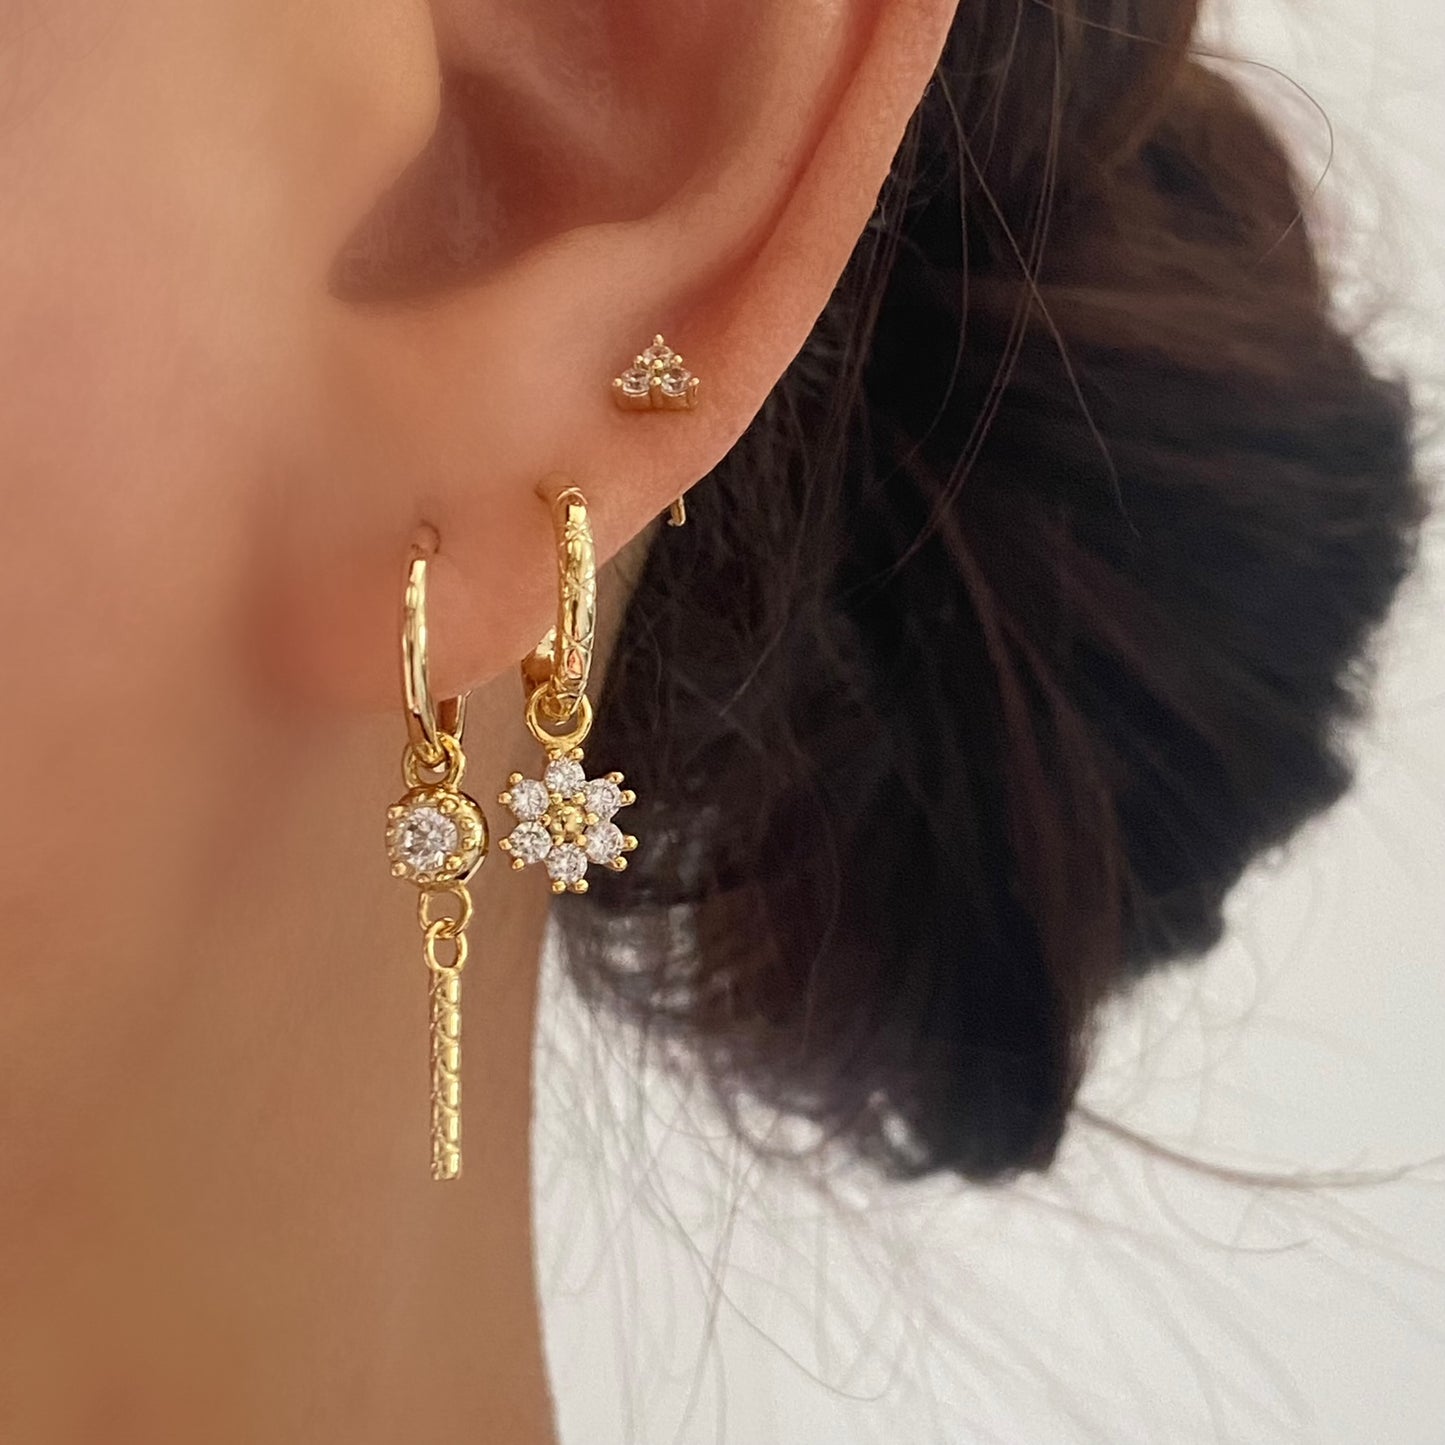 Flower Dangly Ear Stack Set, 925 Sterling Silver 3 pieces Gold Earring Set